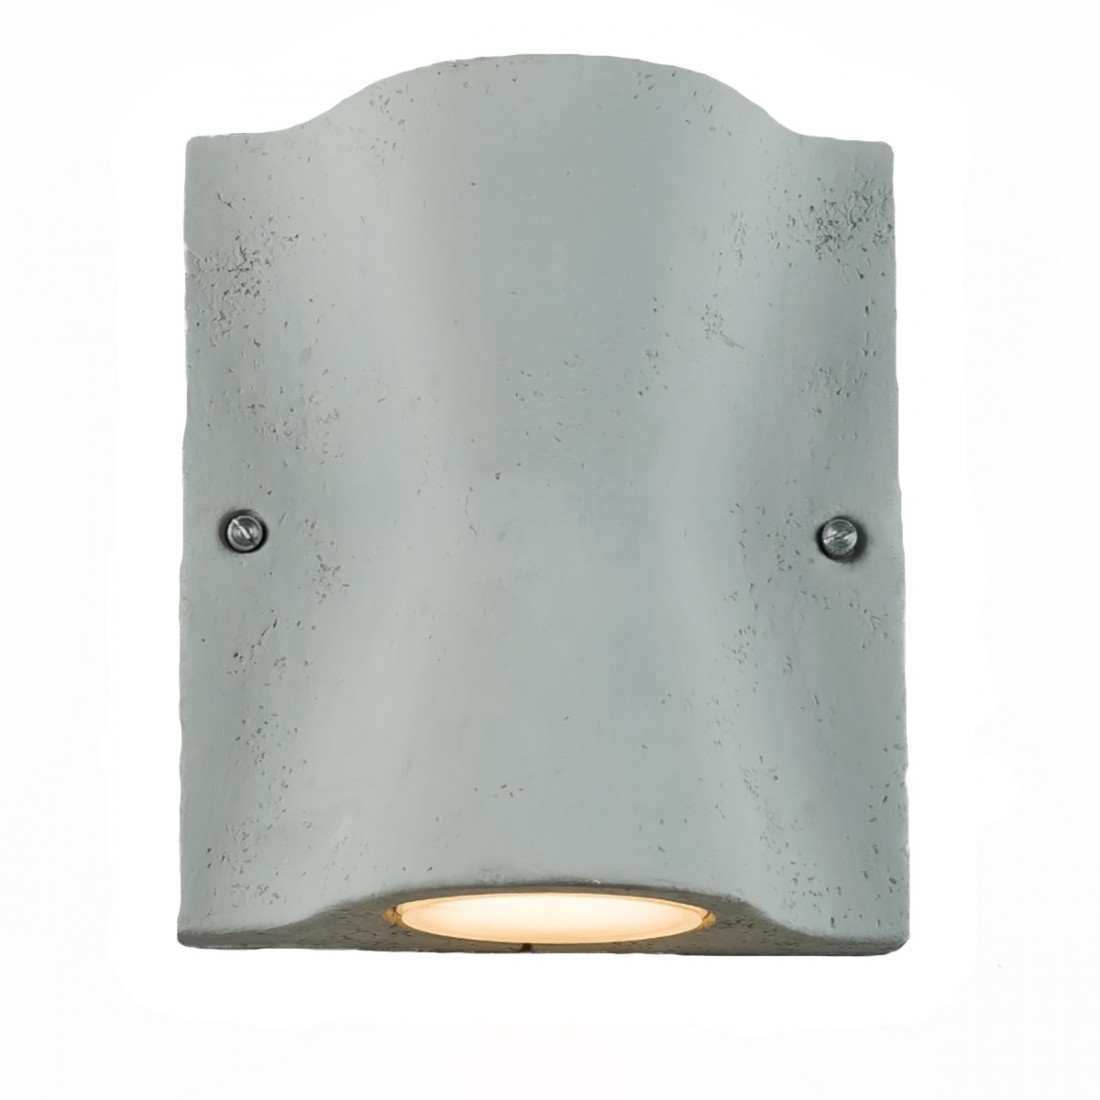 LIDO double emmission wall lamp 